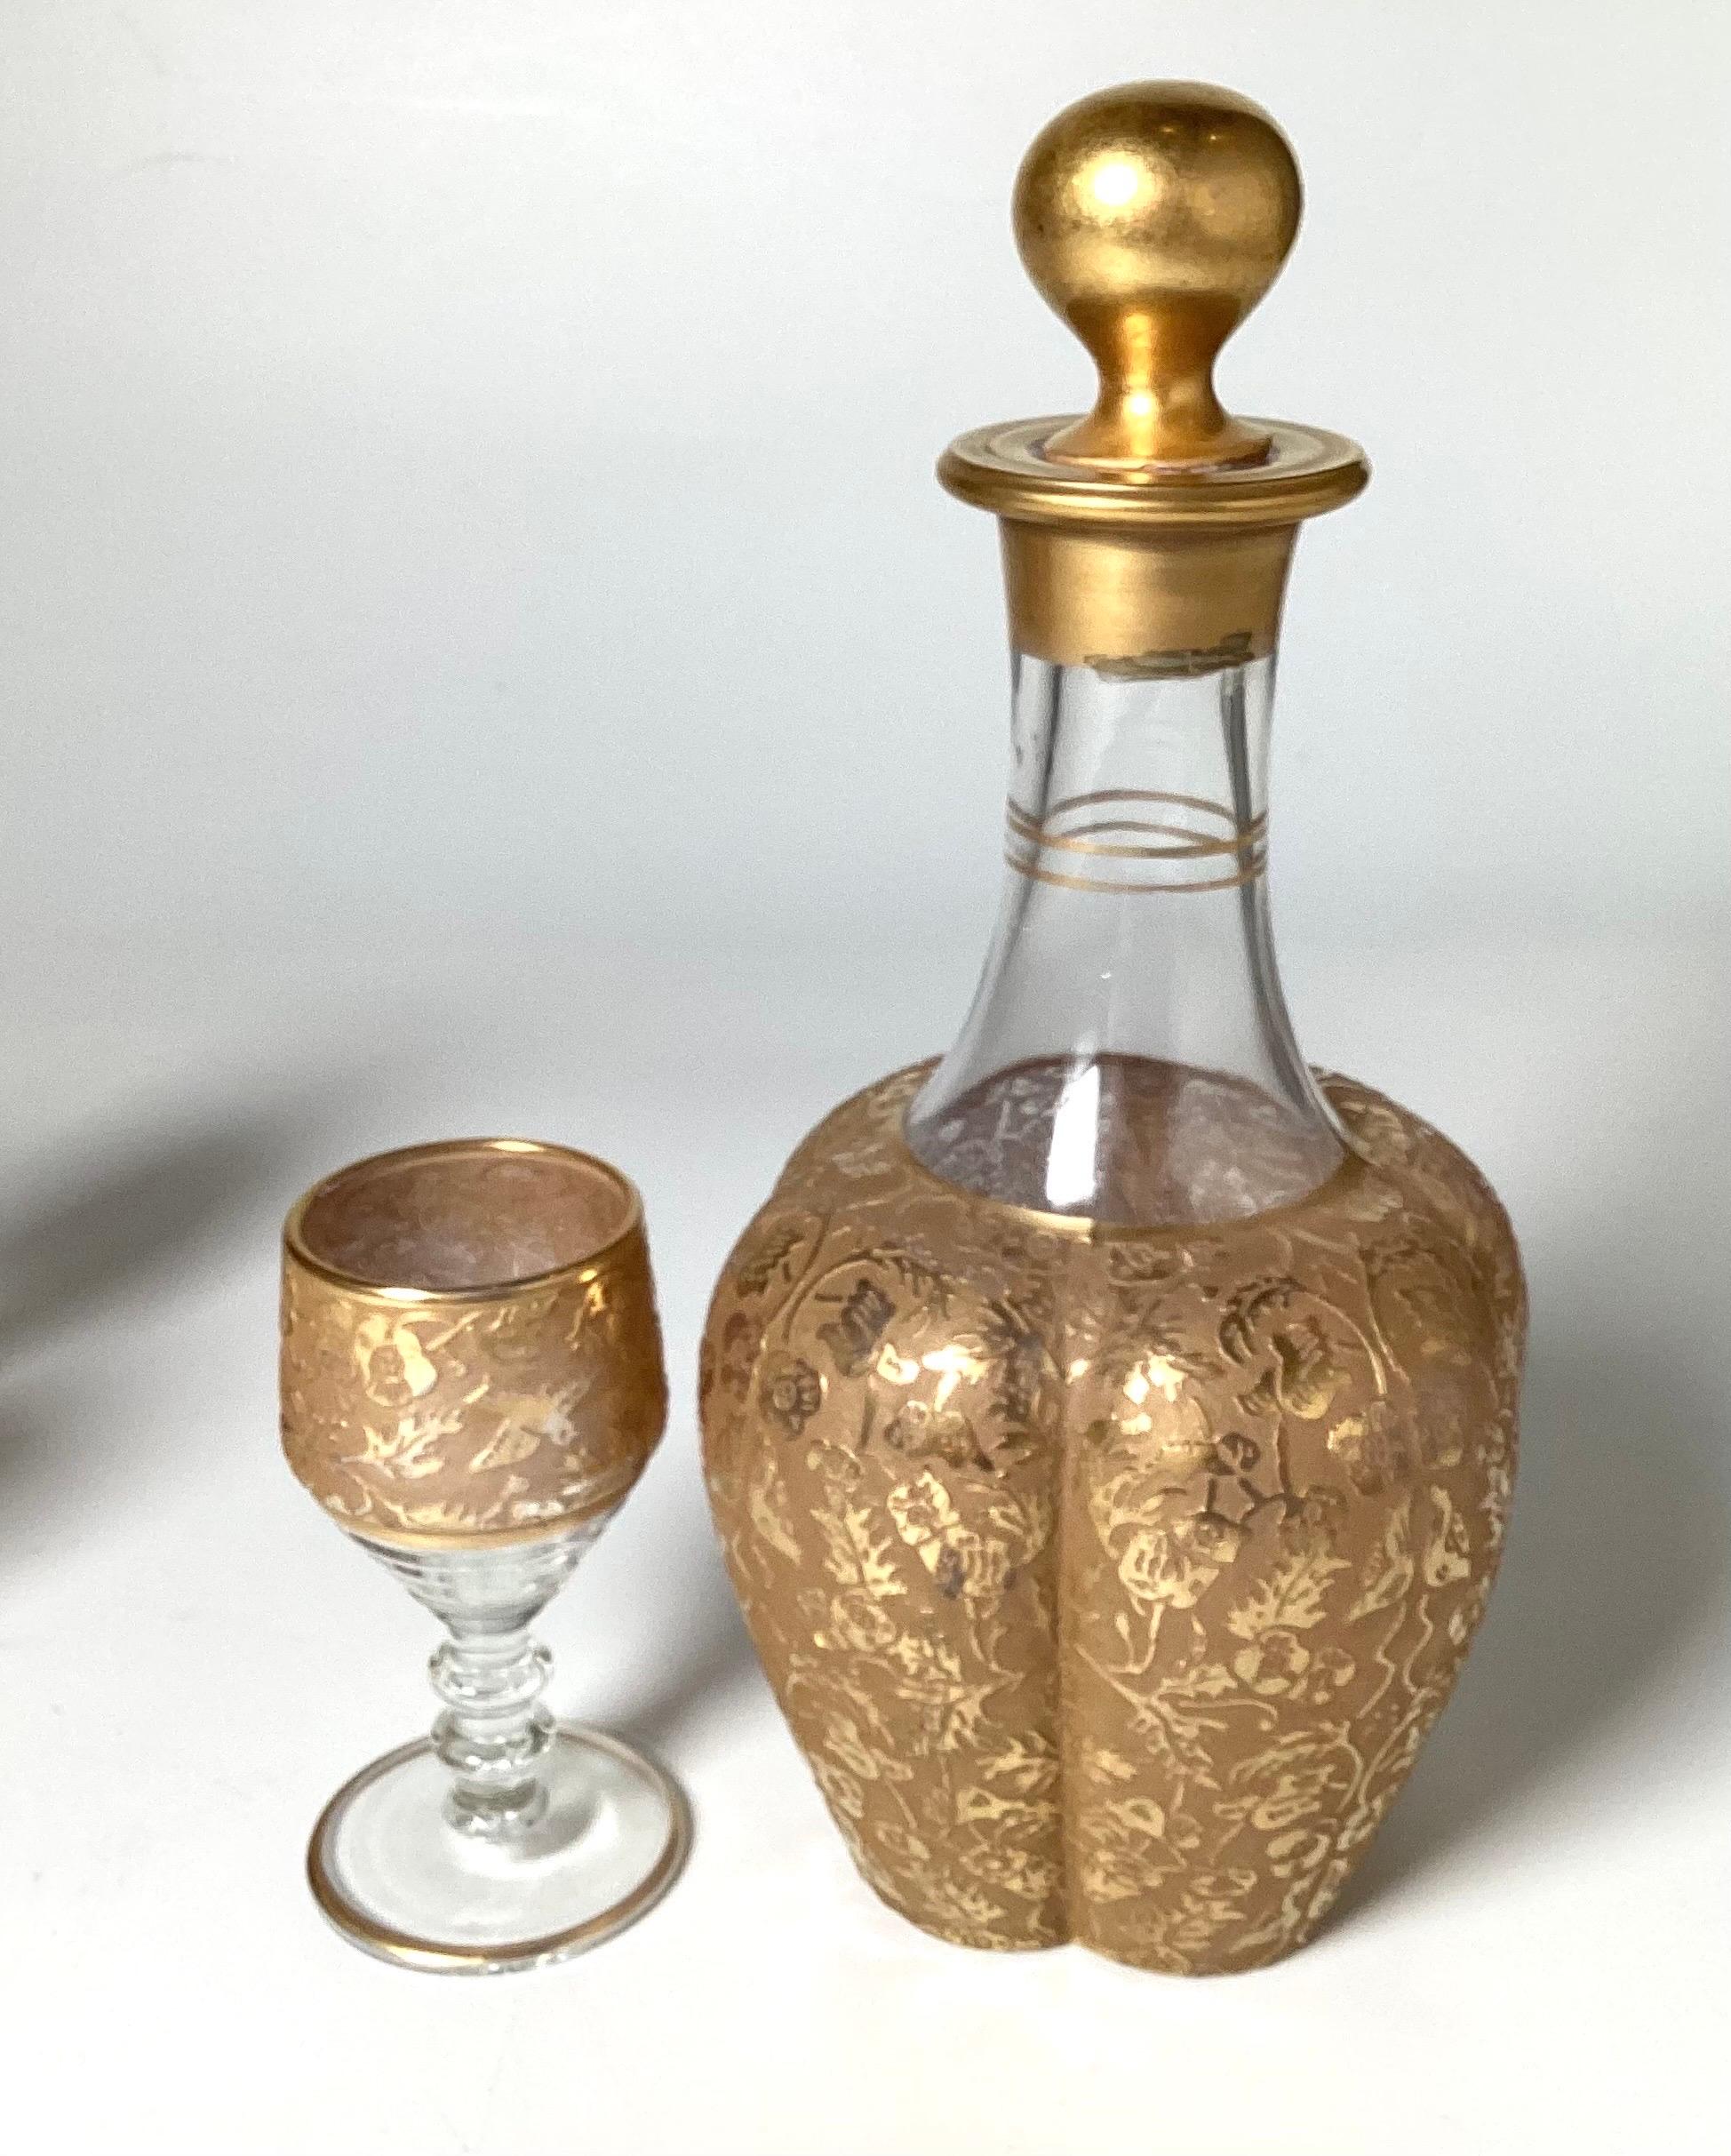 A gilt and engraved glass cordial decanter set. The decanter with original stopper with 5 cordial glasses. All with engraved decoration with heavy gilt trim.